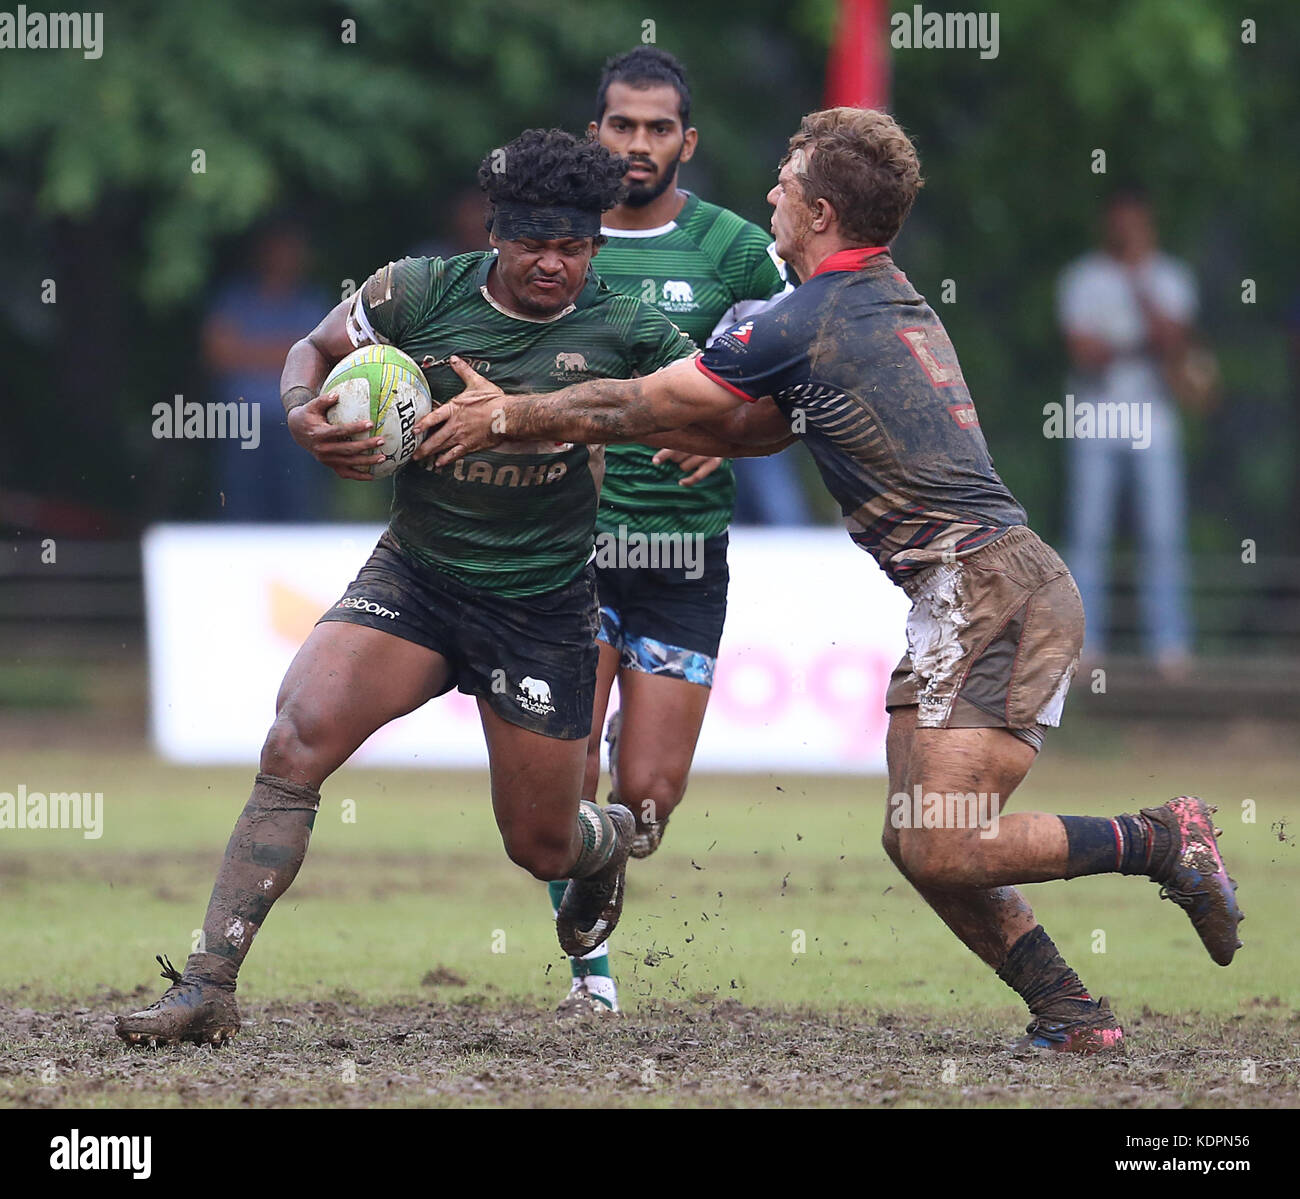 Colombo, Sri Lanka. 15th Oct, 2017. Player of Sri Lanka is tackled by Player of  Hong Kong  during the Asia Rugby Men's Sevens 2017 match between Sri Lanka and Hong Kong at Race Course Ground on 15 October 2017 in Colombo, Sri Lanka.  Credit: Lahiru Harshana/Alamy Live News Credit: Lahiru Harshana/Alamy Live News Stock Photo